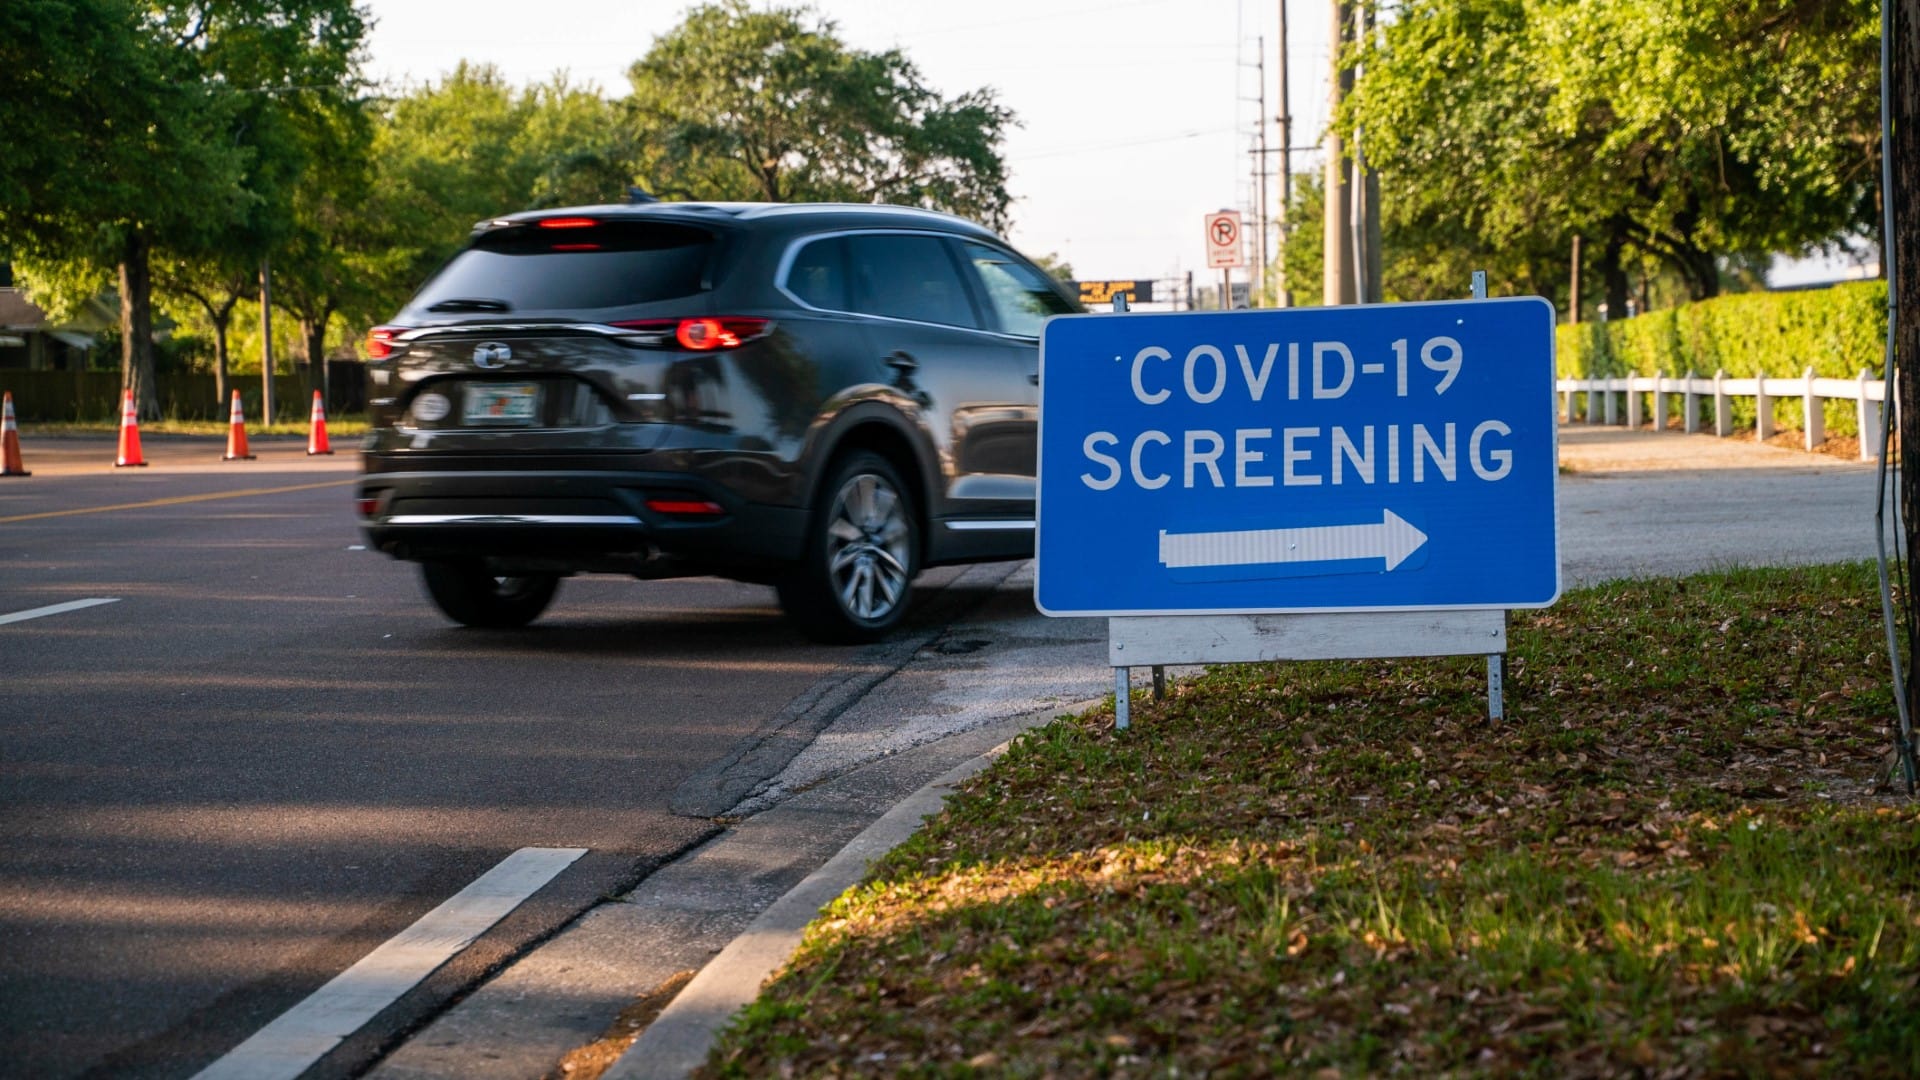 COVID-19 drive through testing location in Tampa, Florida